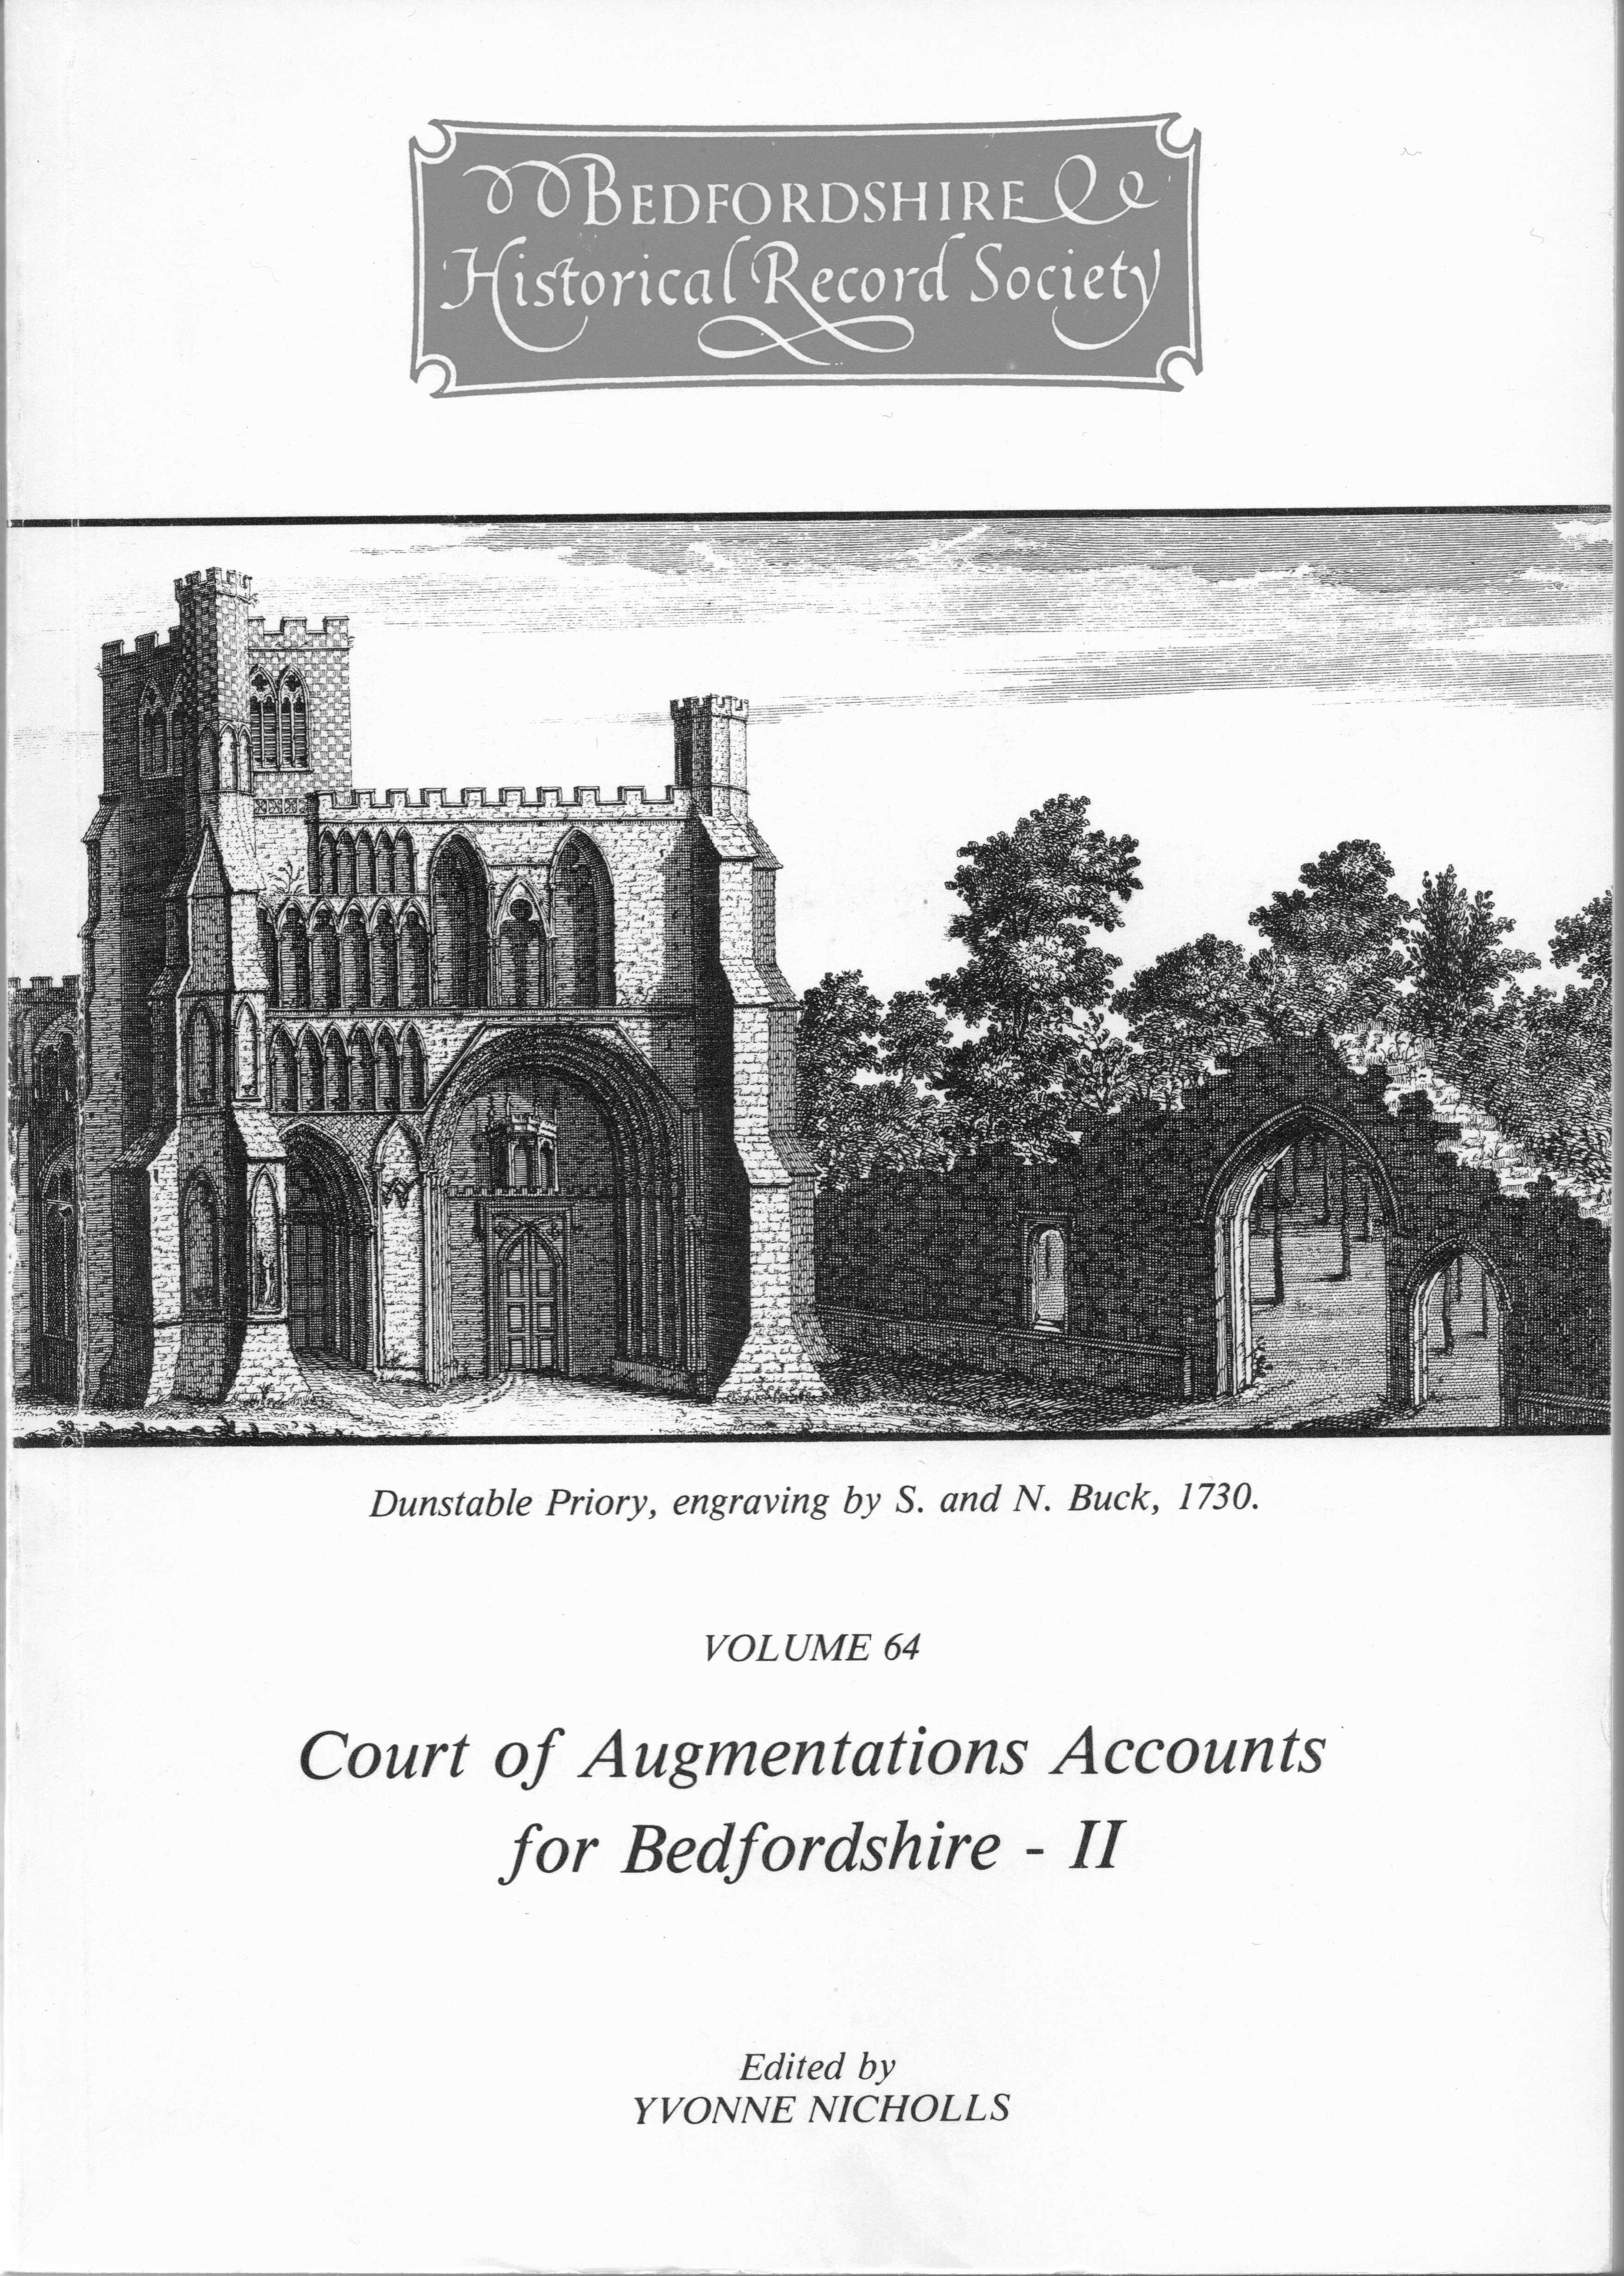 Court of Augmentations Accounts for Bedfordshire - II